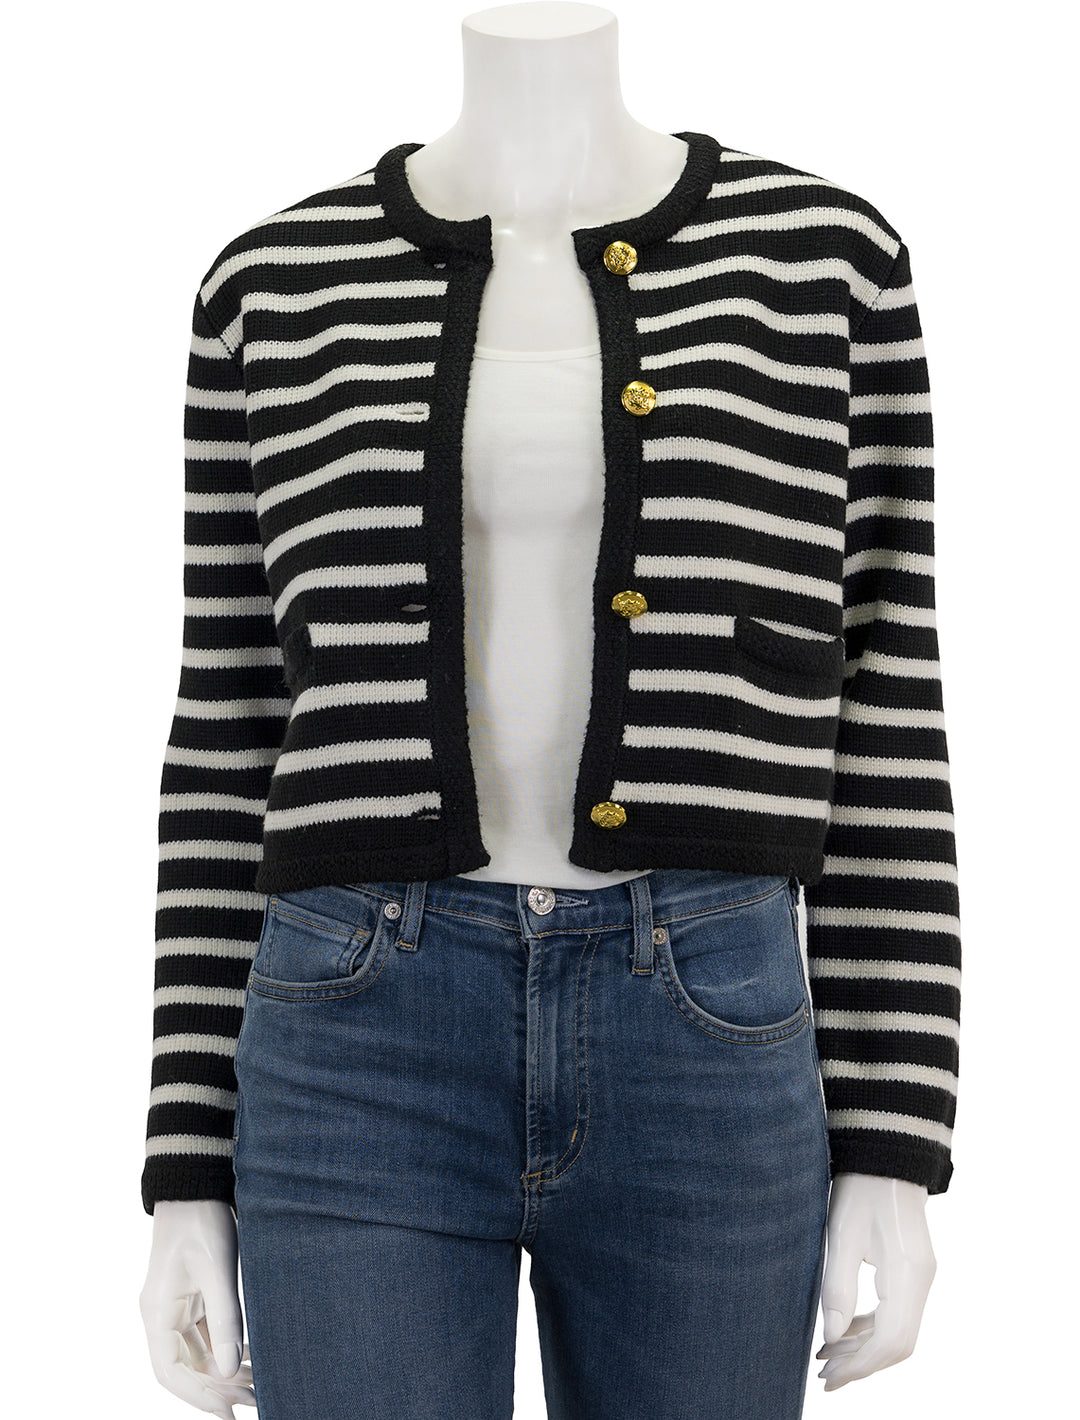 Front view of English Factory's cardigan in black and ivory stripe, unbuttoned.